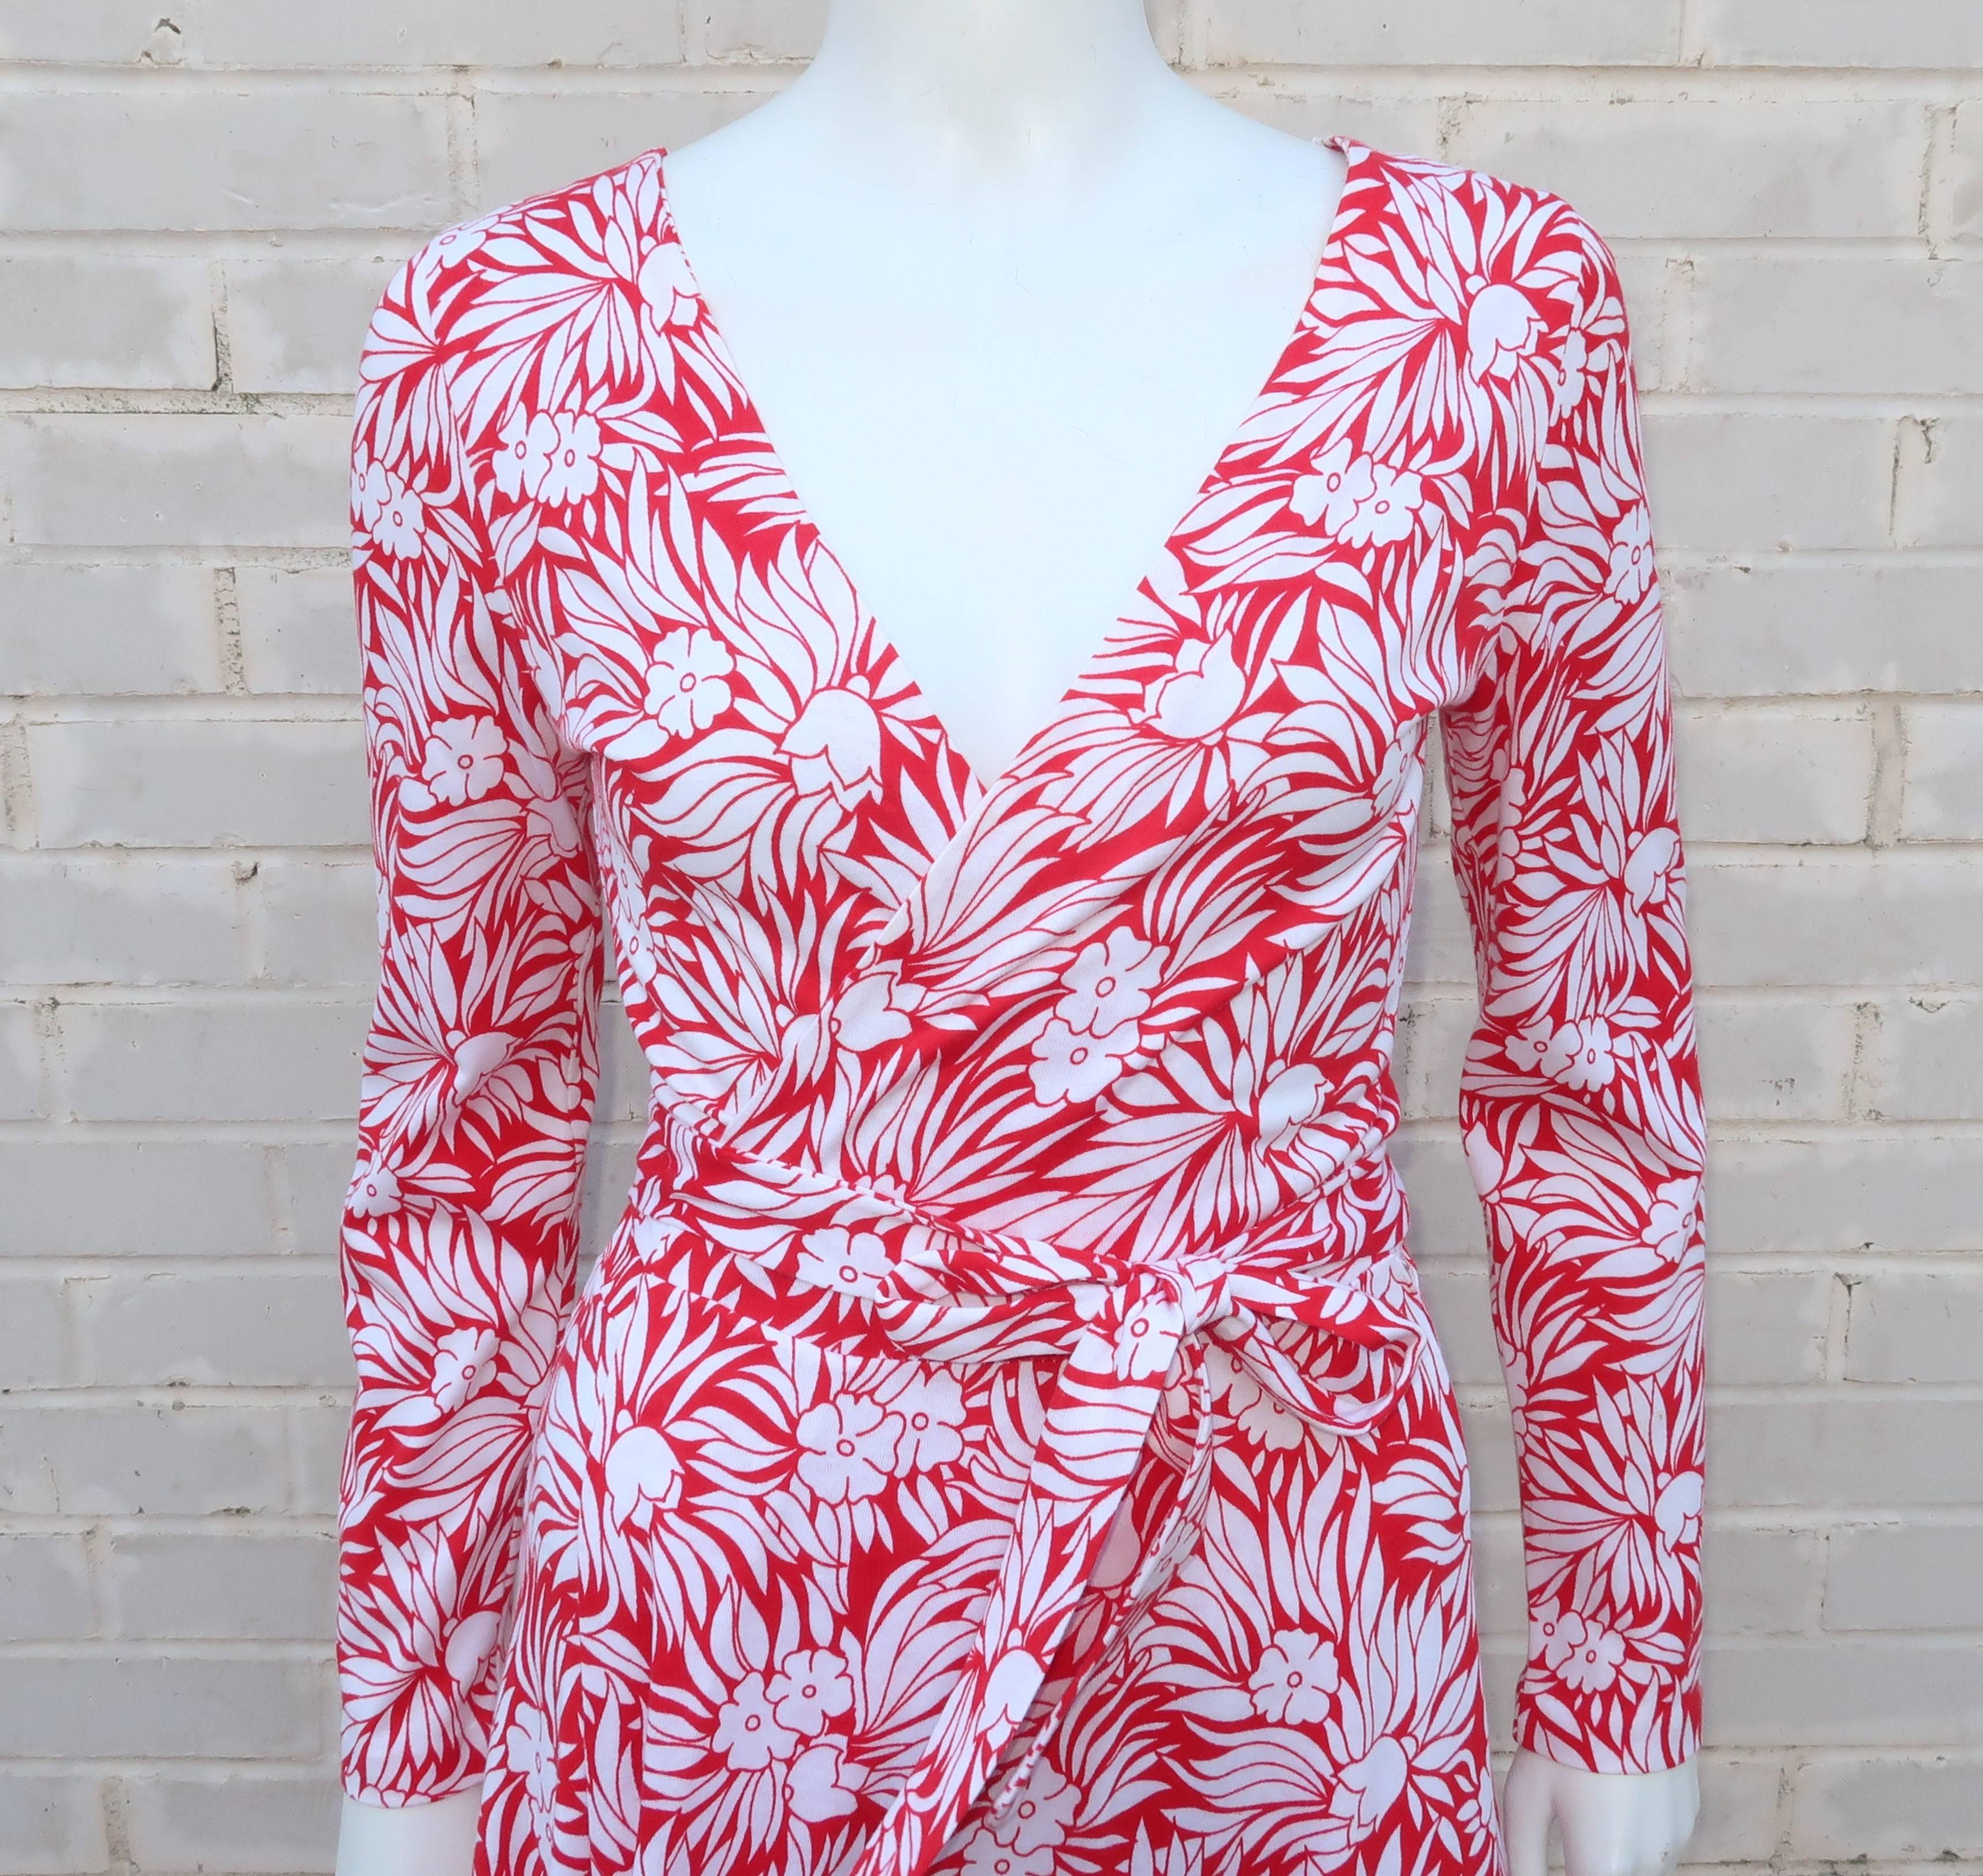 This is an unusual maxi version of Diane Von Furstenberg’s classic wrap dress.  The cotton jersey fabric features a graphic red and white tropical floral print.  The stylish wrap silhouette provides for a sexy plunging neckline and hint of leg with